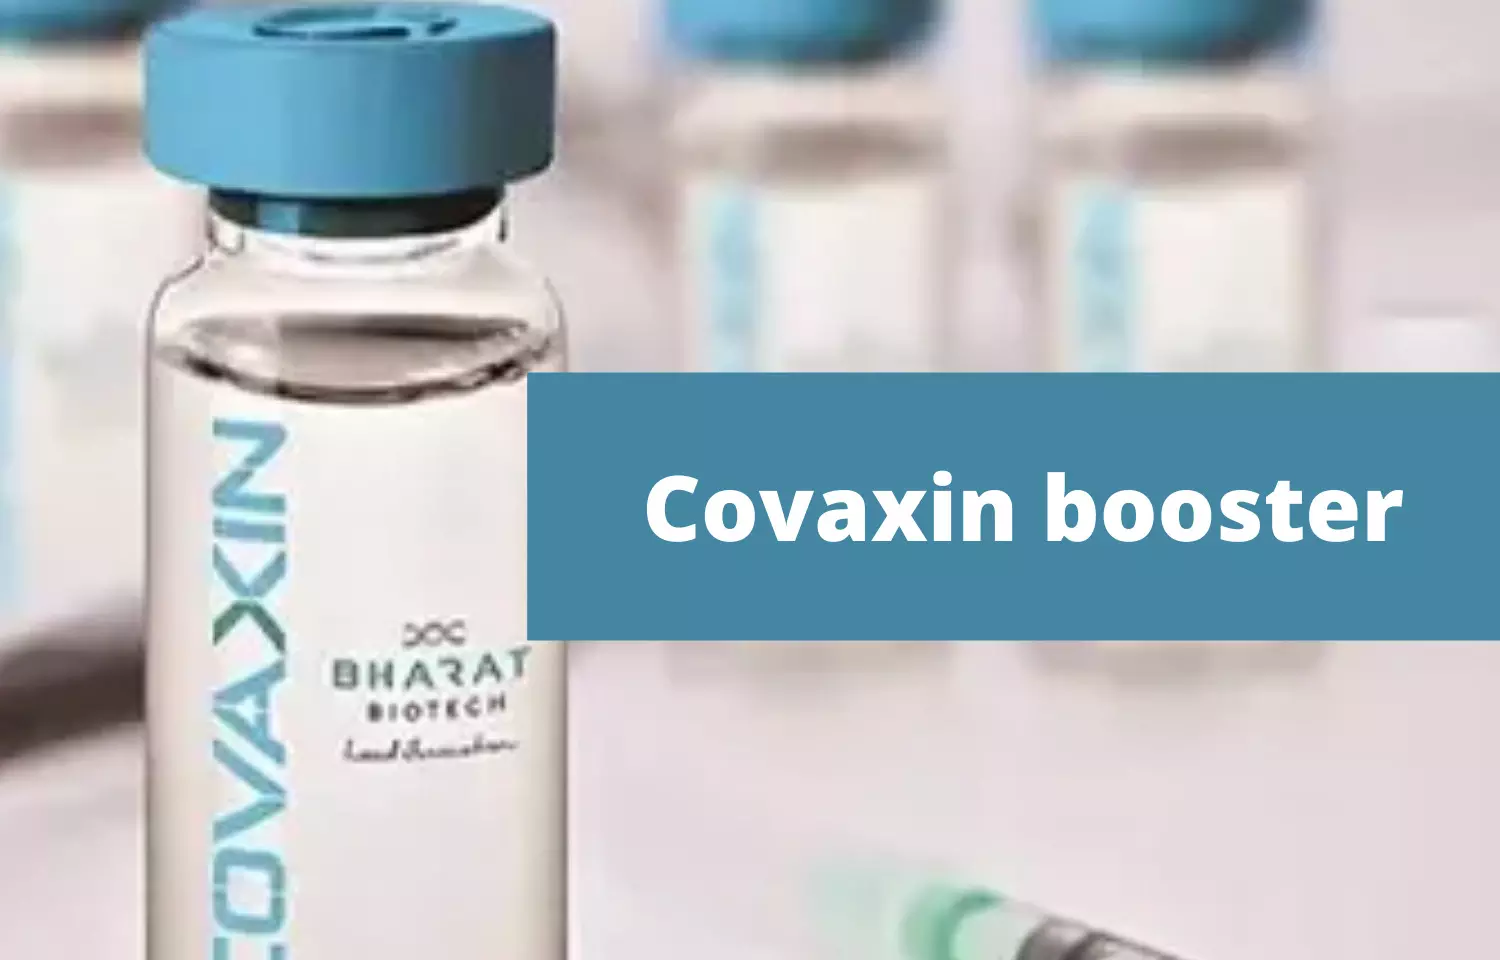 Bharat Biotech says Japan approves Covaxin booster dose for travellers